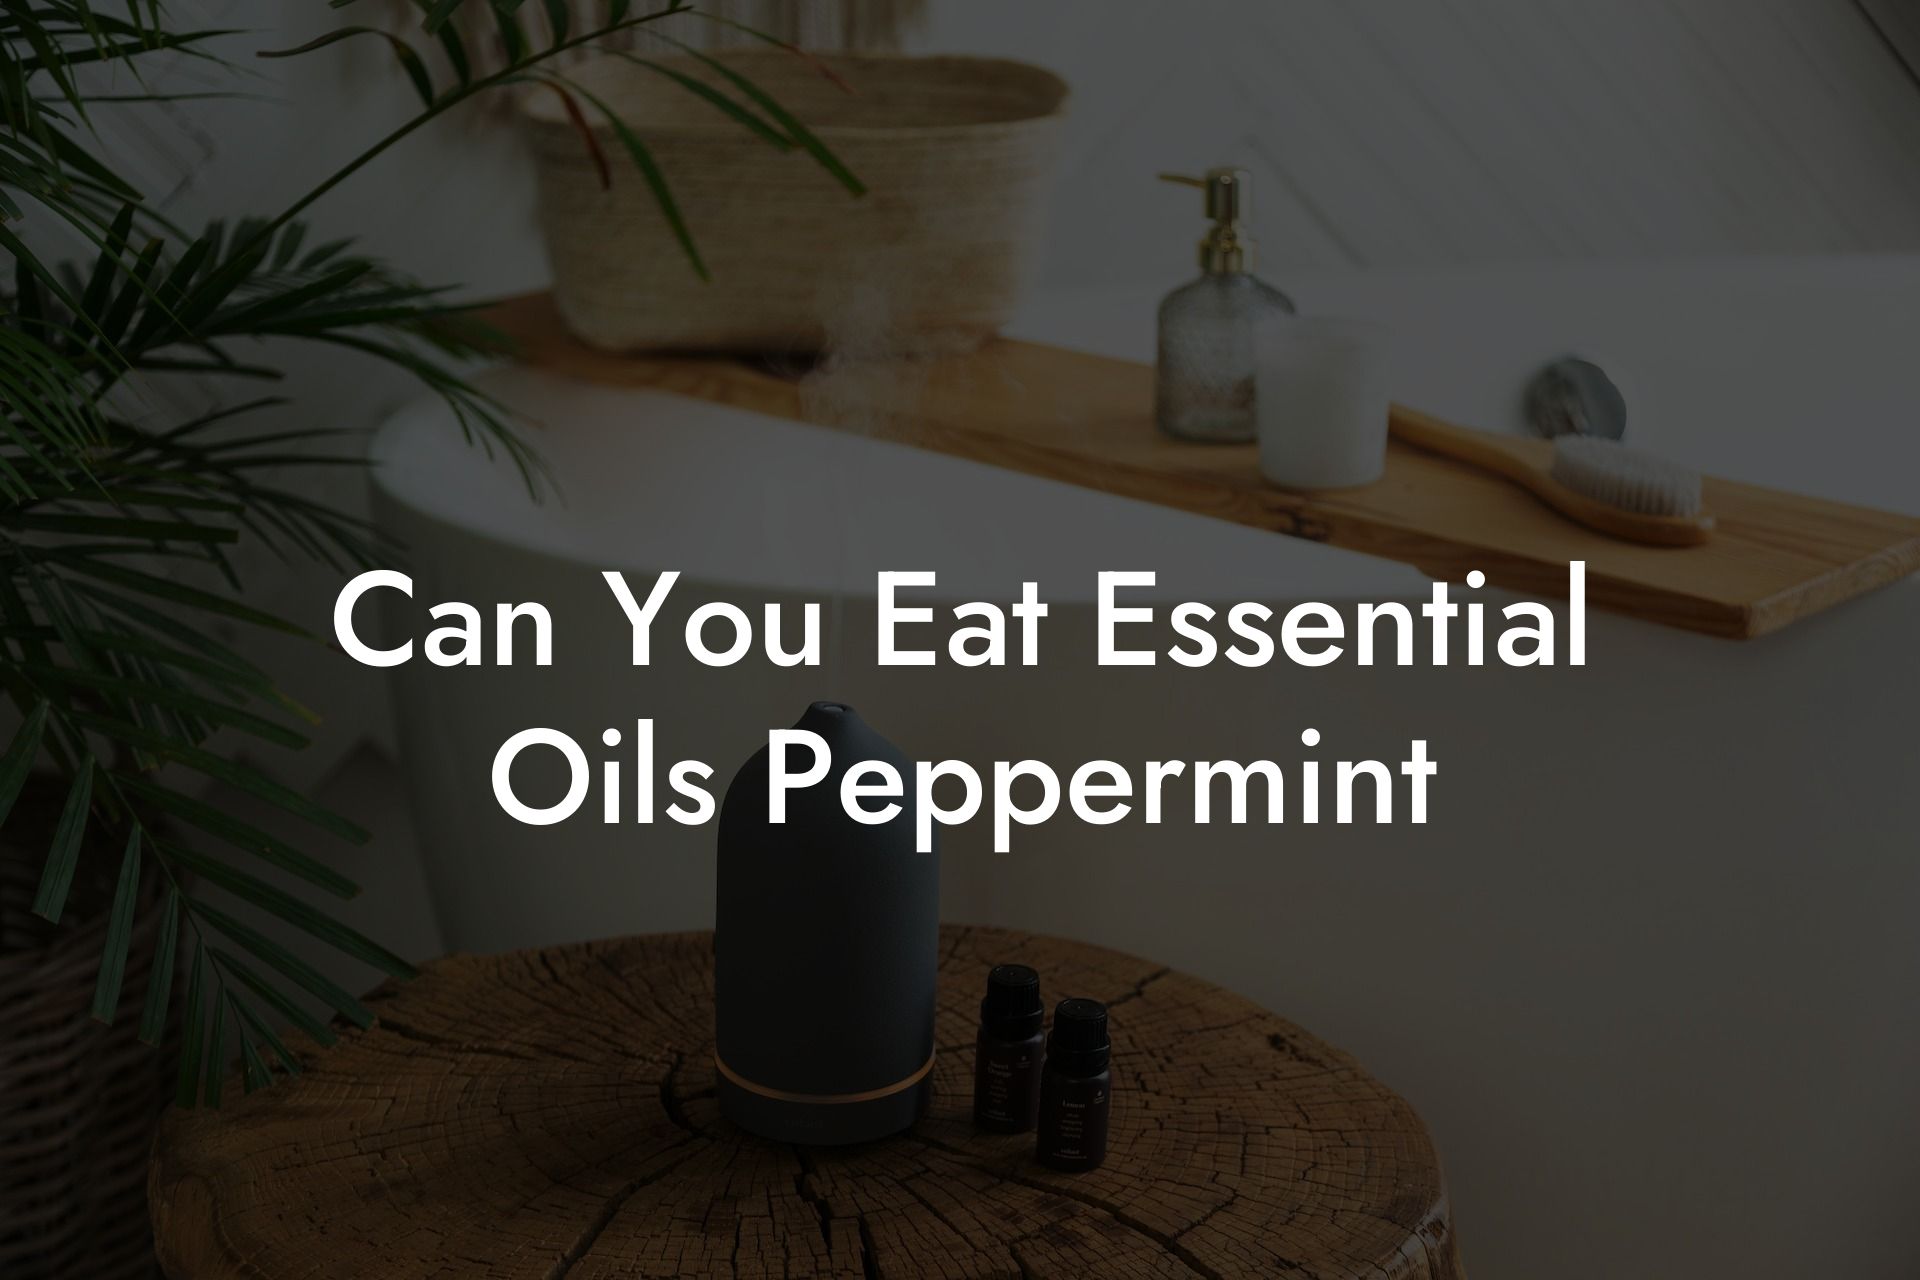 Can You Eat Essential Oils Peppermint